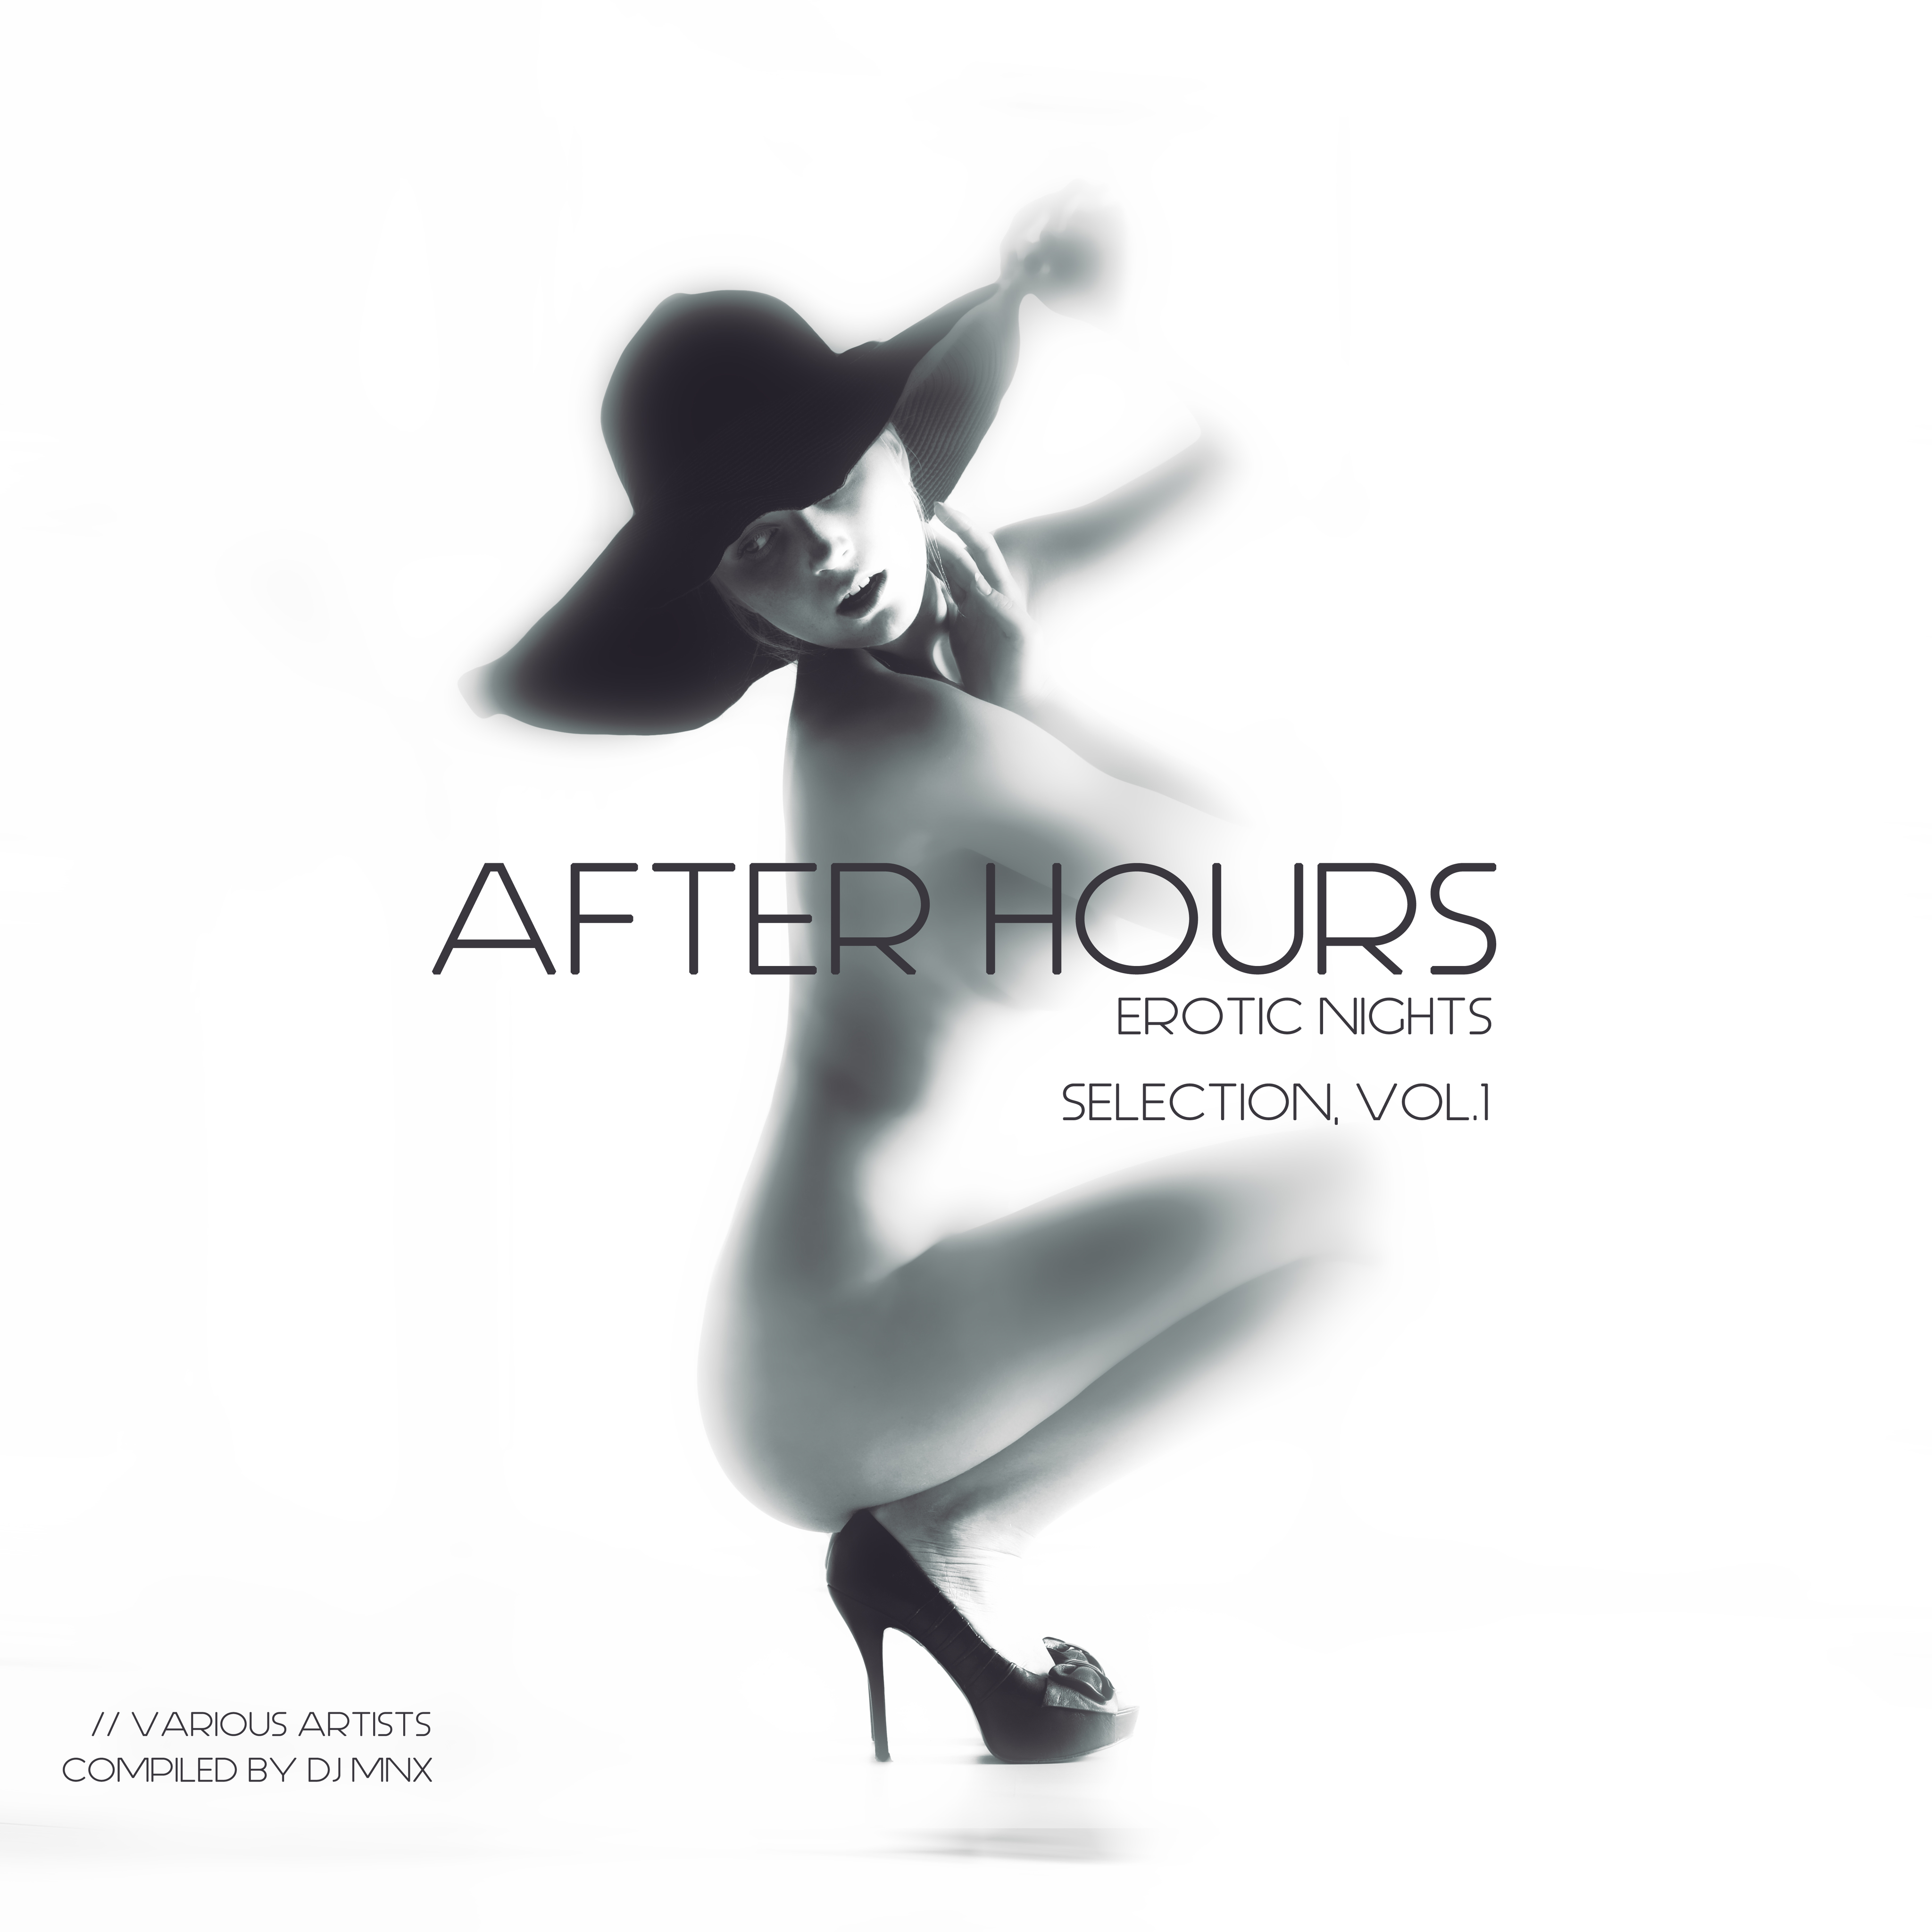 After Hours (Erotic Nights Selection, Vol. 1)